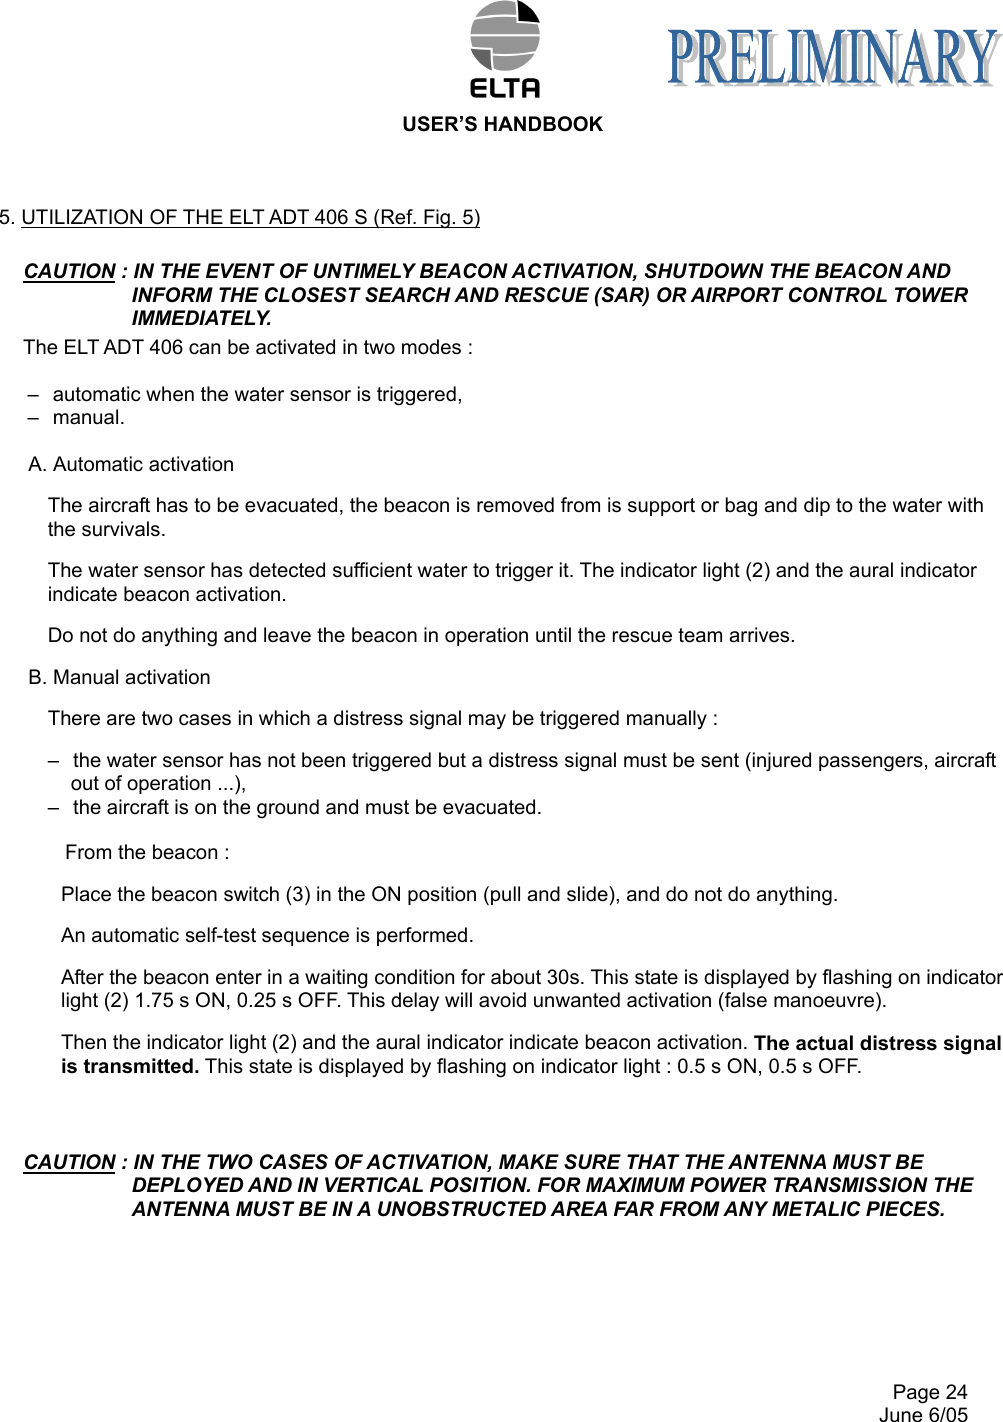  USER’S HANDBOOK     Page 24   June 6/05 5. UTILIZATION OF THE ELT ADT 406 S (Ref. Fig. 5) CAUTION : IN THE EVENT OF UNTIMELY BEACON ACTIVATION, SHUTDOWN THE BEACON AND INFORM THE CLOSEST SEARCH AND RESCUE (SAR) OR AIRPORT CONTROL TOWER IMMEDIATELY. The ELT ADT 406 can be activated in two modes :  –  automatic when the water sensor is triggered, –  manual.  A. Automatic activation The aircraft has to be evacuated, the beacon is removed from is support or bag and dip to the water with the survivals.  The water sensor has detected sufficient water to trigger it. The indicator light (2) and the aural indicator indicate beacon activation. Do not do anything and leave the beacon in operation until the rescue team arrives. B. Manual activation  There are two cases in which a distress signal may be triggered manually : –  the water sensor has not been triggered but a distress signal must be sent (injured passengers, aircraft out of operation ...), –  the aircraft is on the ground and must be evacuated.  From the beacon : Place the beacon switch (3) in the ON position (pull and slide), and do not do anything. An automatic self-test sequence is performed. After the beacon enter in a waiting condition for about 30s. This state is displayed by flashing on indicator light (2) 1.75 s ON, 0.25 s OFF. This delay will avoid unwanted activation (false manoeuvre). Then the indicator light (2) and the aural indicator indicate beacon activation. The actual distress signal is transmitted. This state is displayed by flashing on indicator light : 0.5 s ON, 0.5 s OFF.          CAUTION : IN THE TWO CASES OF ACTIVATION, MAKE SURE THAT THE ANTENNA MUST BE DEPLOYED AND IN VERTICAL POSITION. FOR MAXIMUM POWER TRANSMISSION THE ANTENNA MUST BE IN A UNOBSTRUCTED AREA FAR FROM ANY METALIC PIECES.            